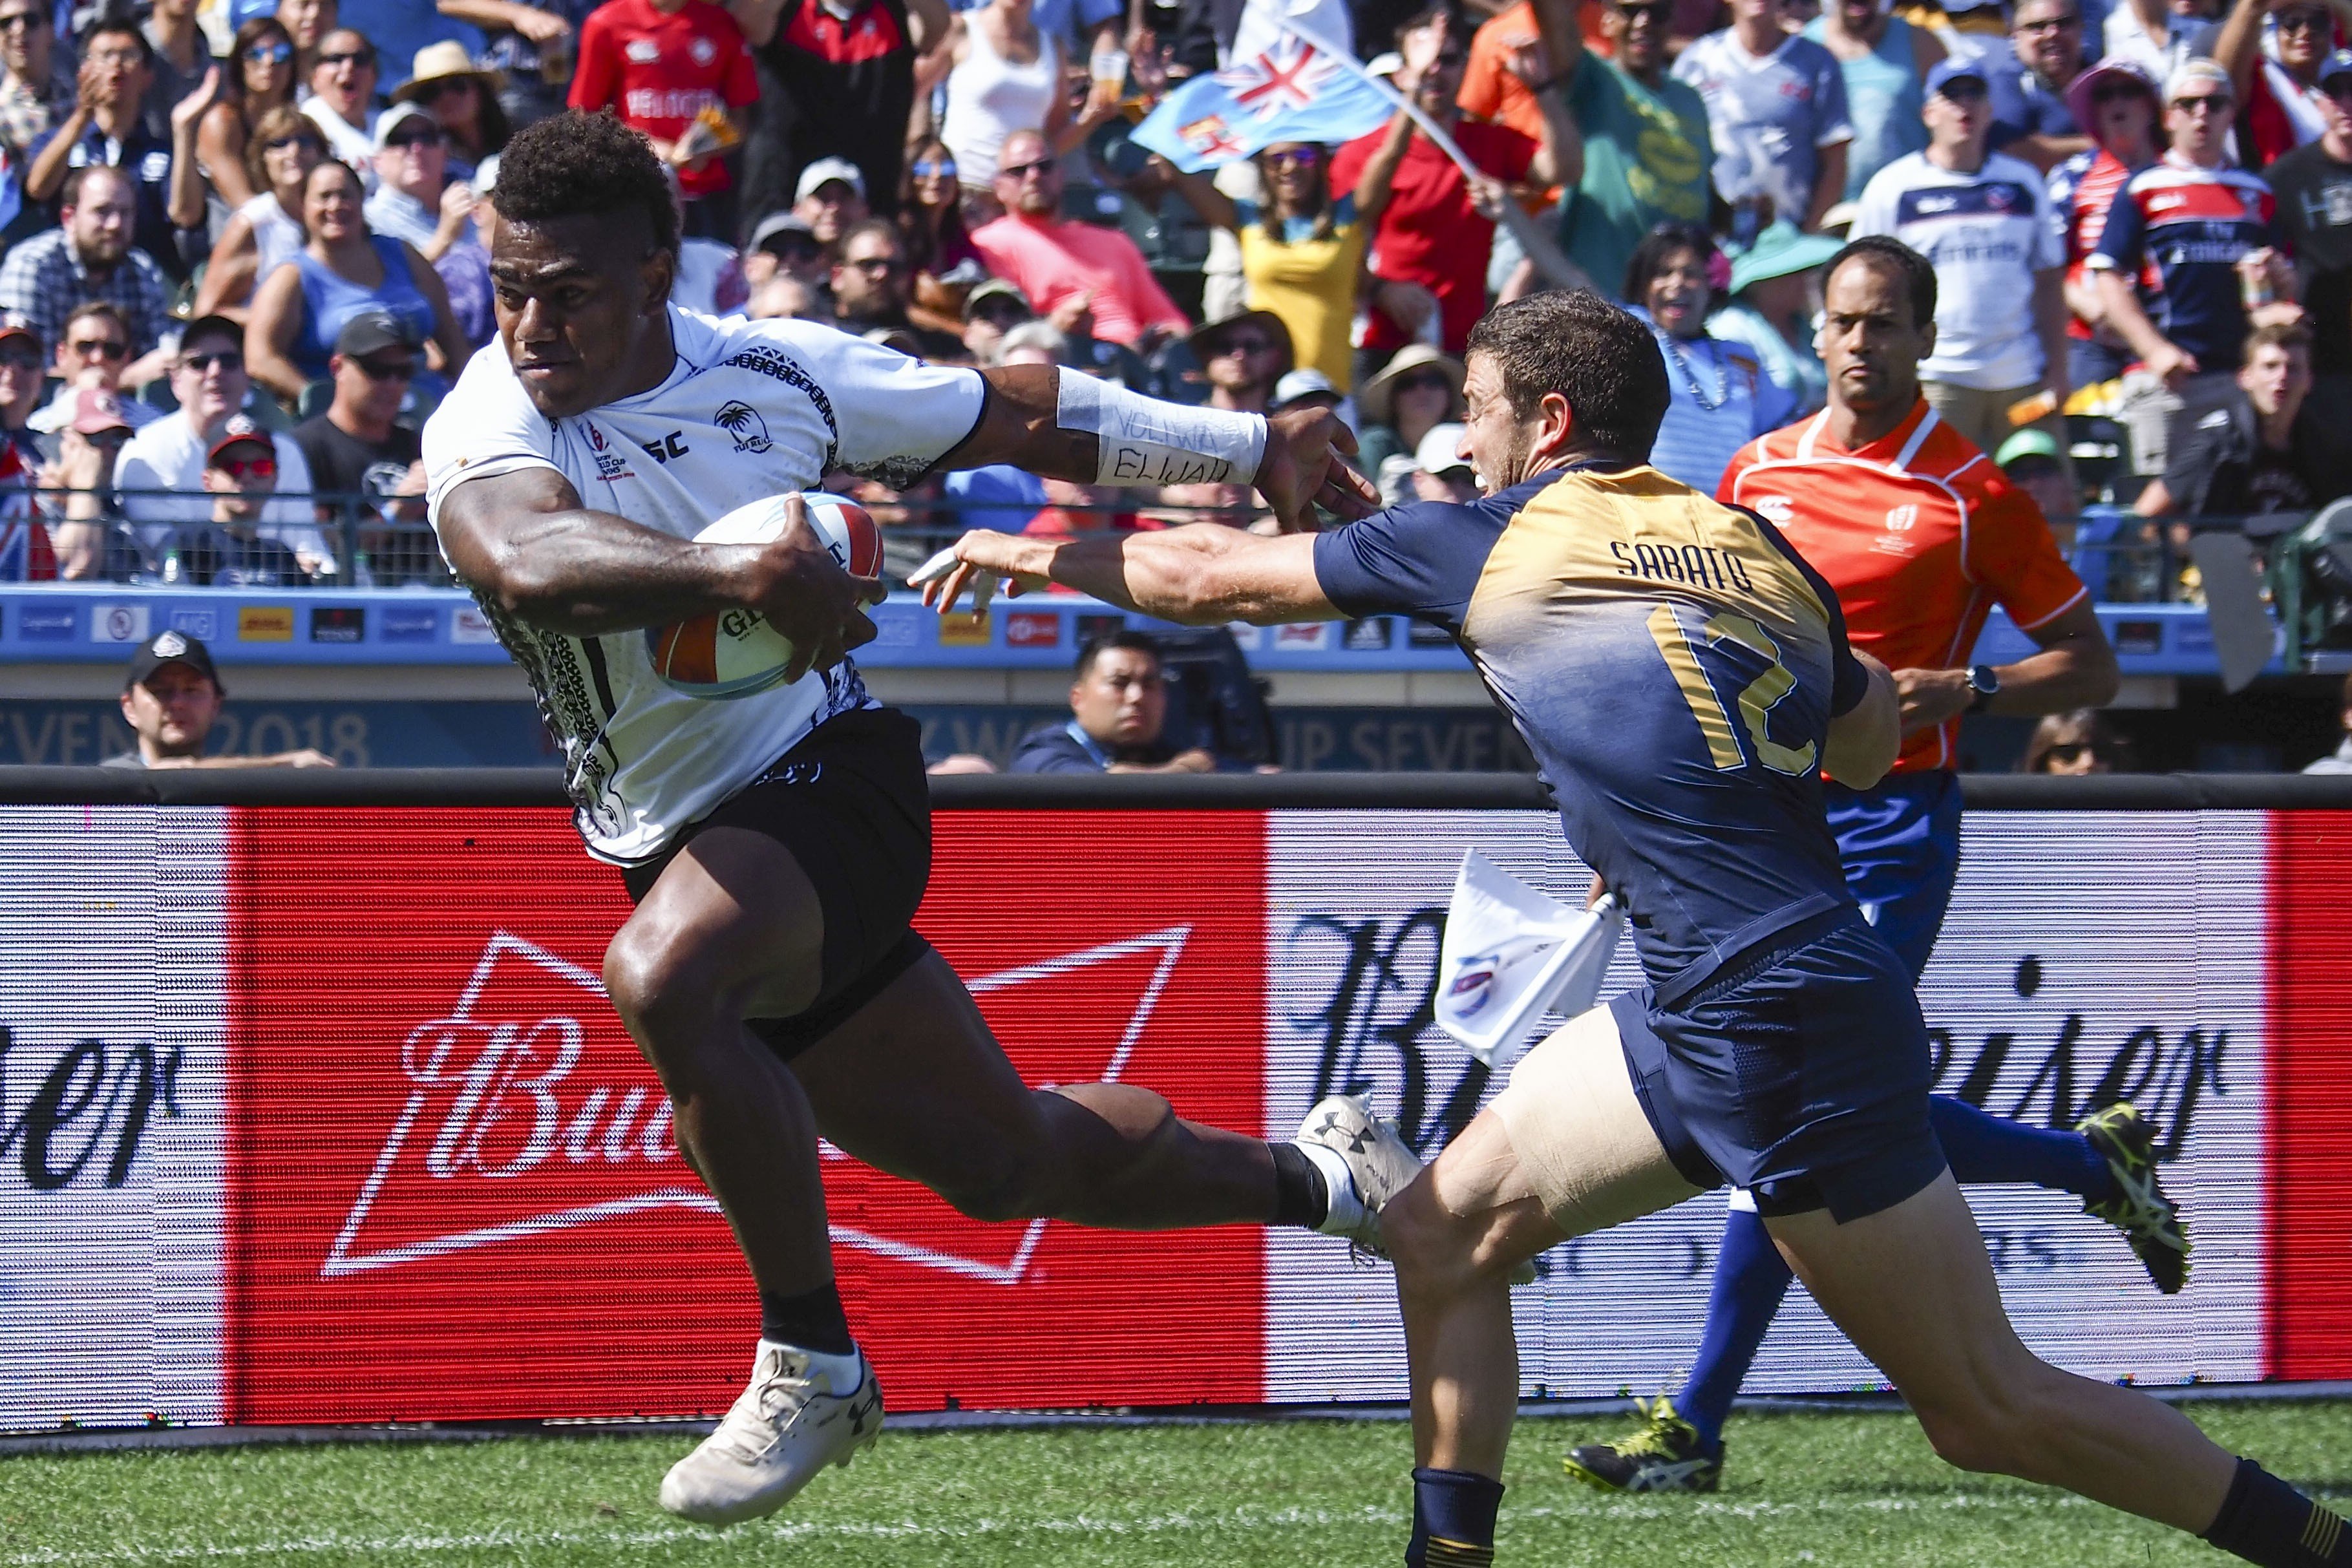 Josua Tuisova runs against Argentina’s Franco Sabato in the Rugby World Cup Sevens at AT&T Park. Photo: USA TODAY Sports